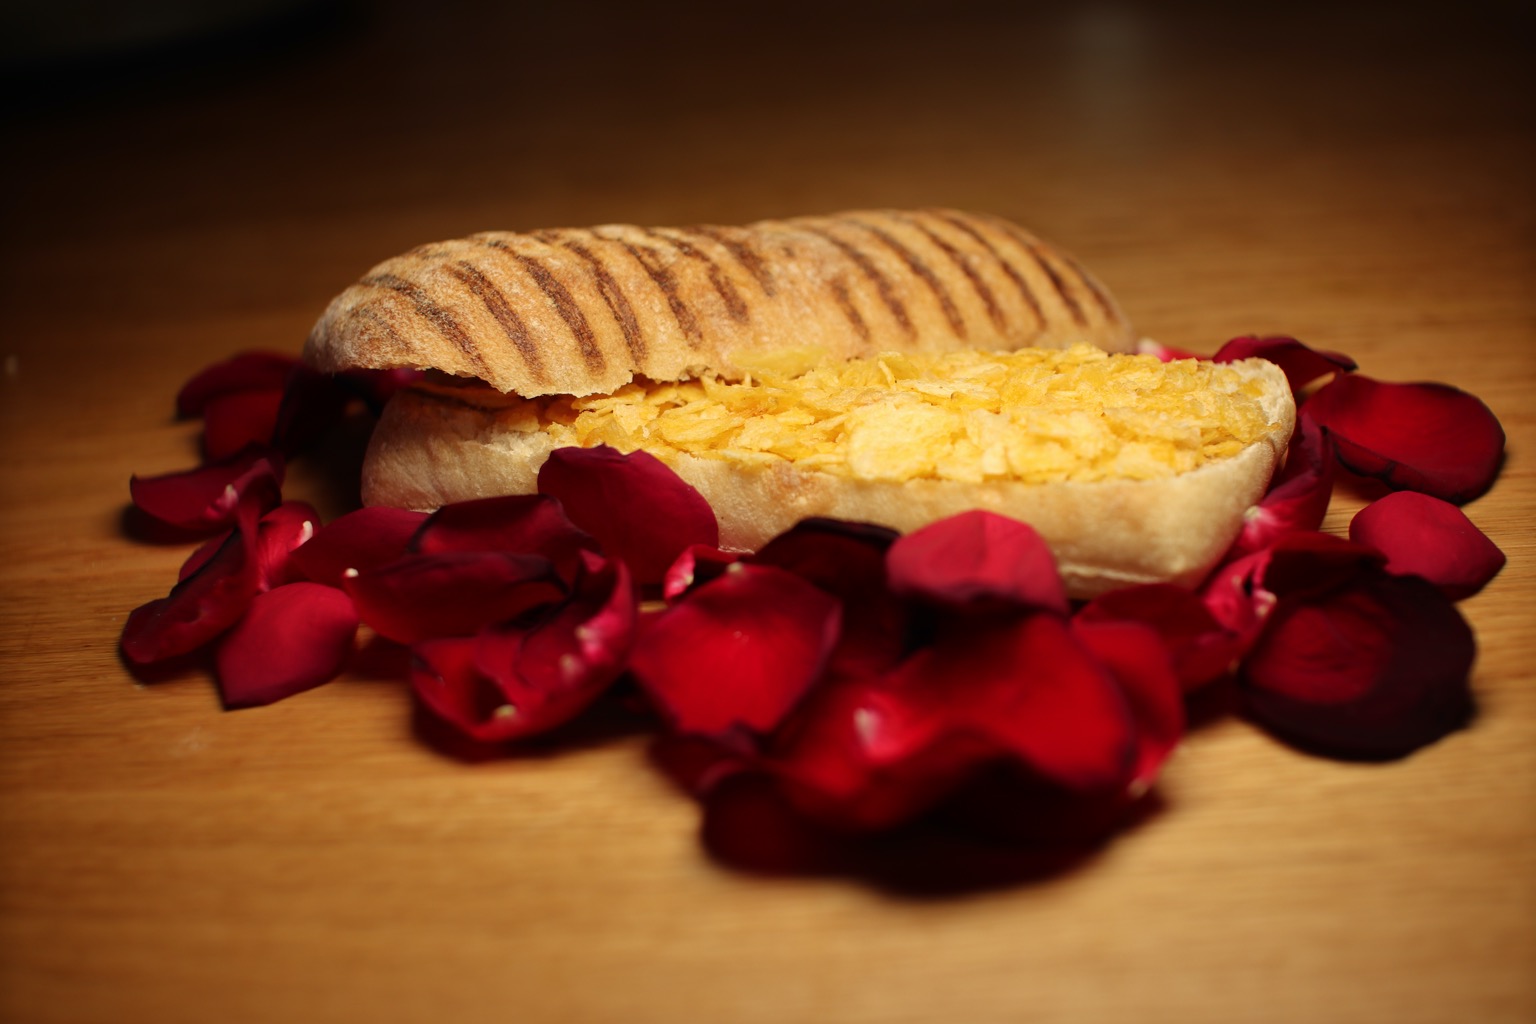 Crushed crisps in/on panini on a bed of petals